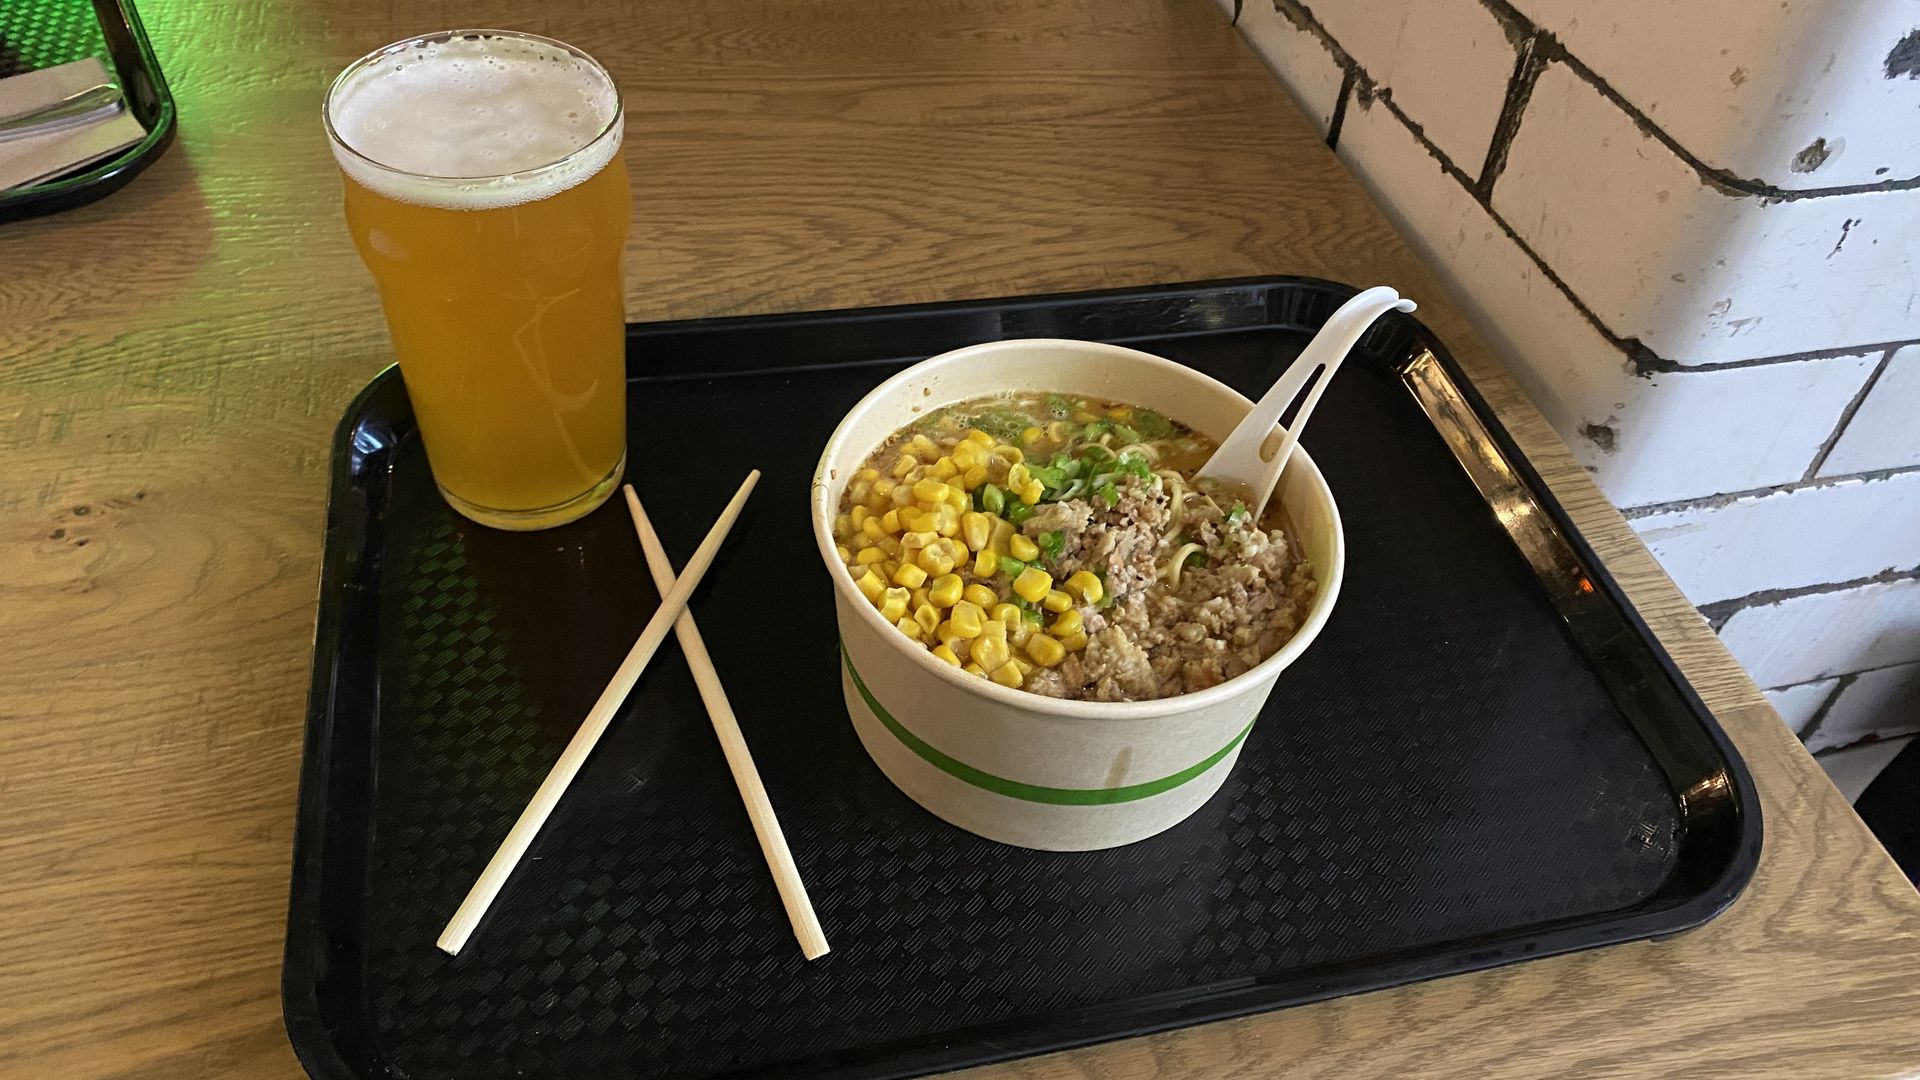 A ramen bowl topped with corn, ground pork and scallions with chopsticks and a glass of beer next to it